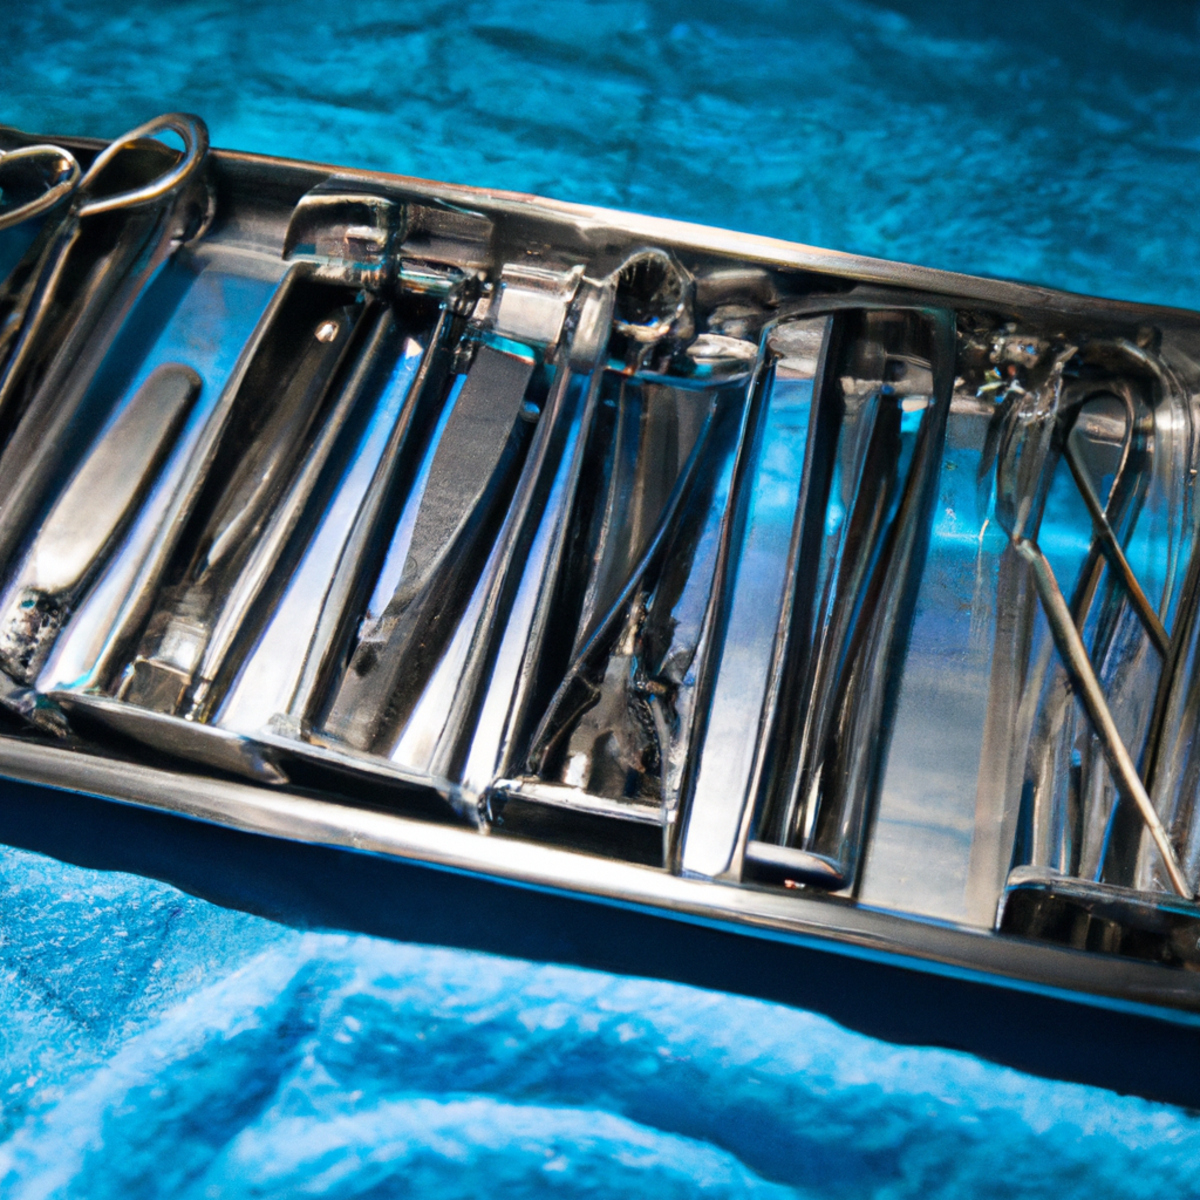 Sterile medical tools on tray, reflecting bright lights, against blue surgical drapes. Precision in gallbladder carcinoma tumor removal.